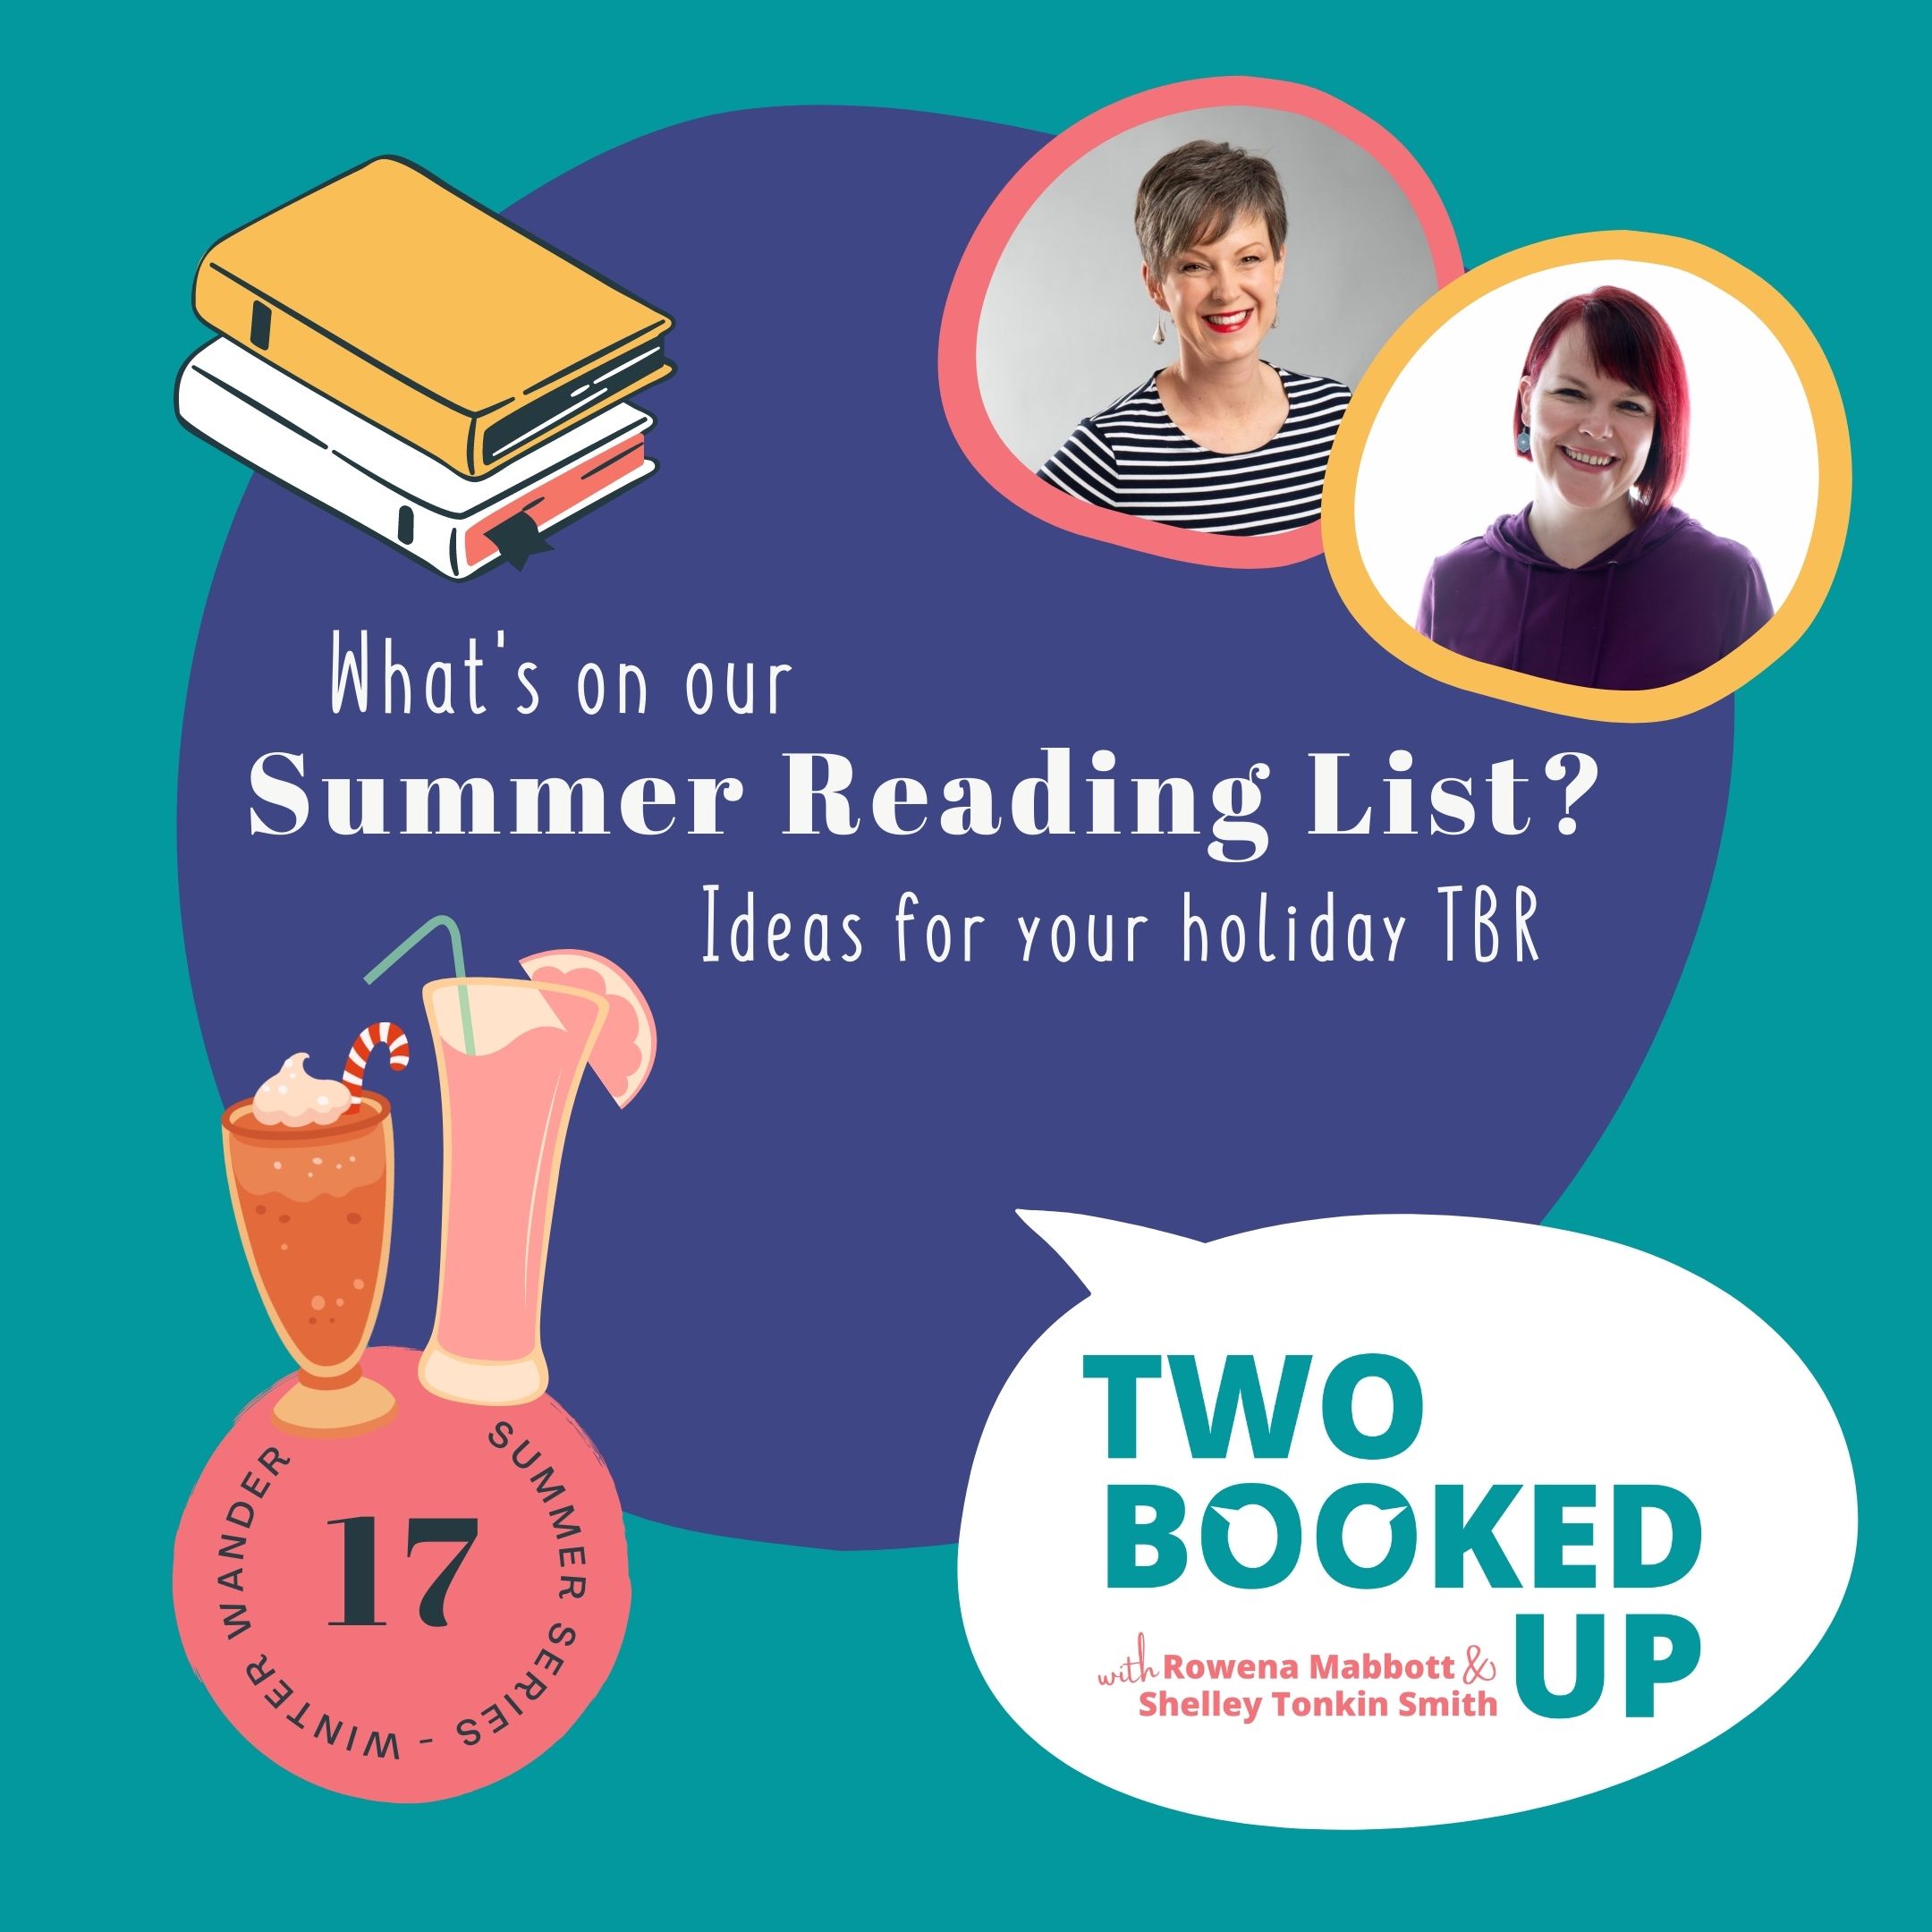 TBU#17 What’s on our summer reading list?